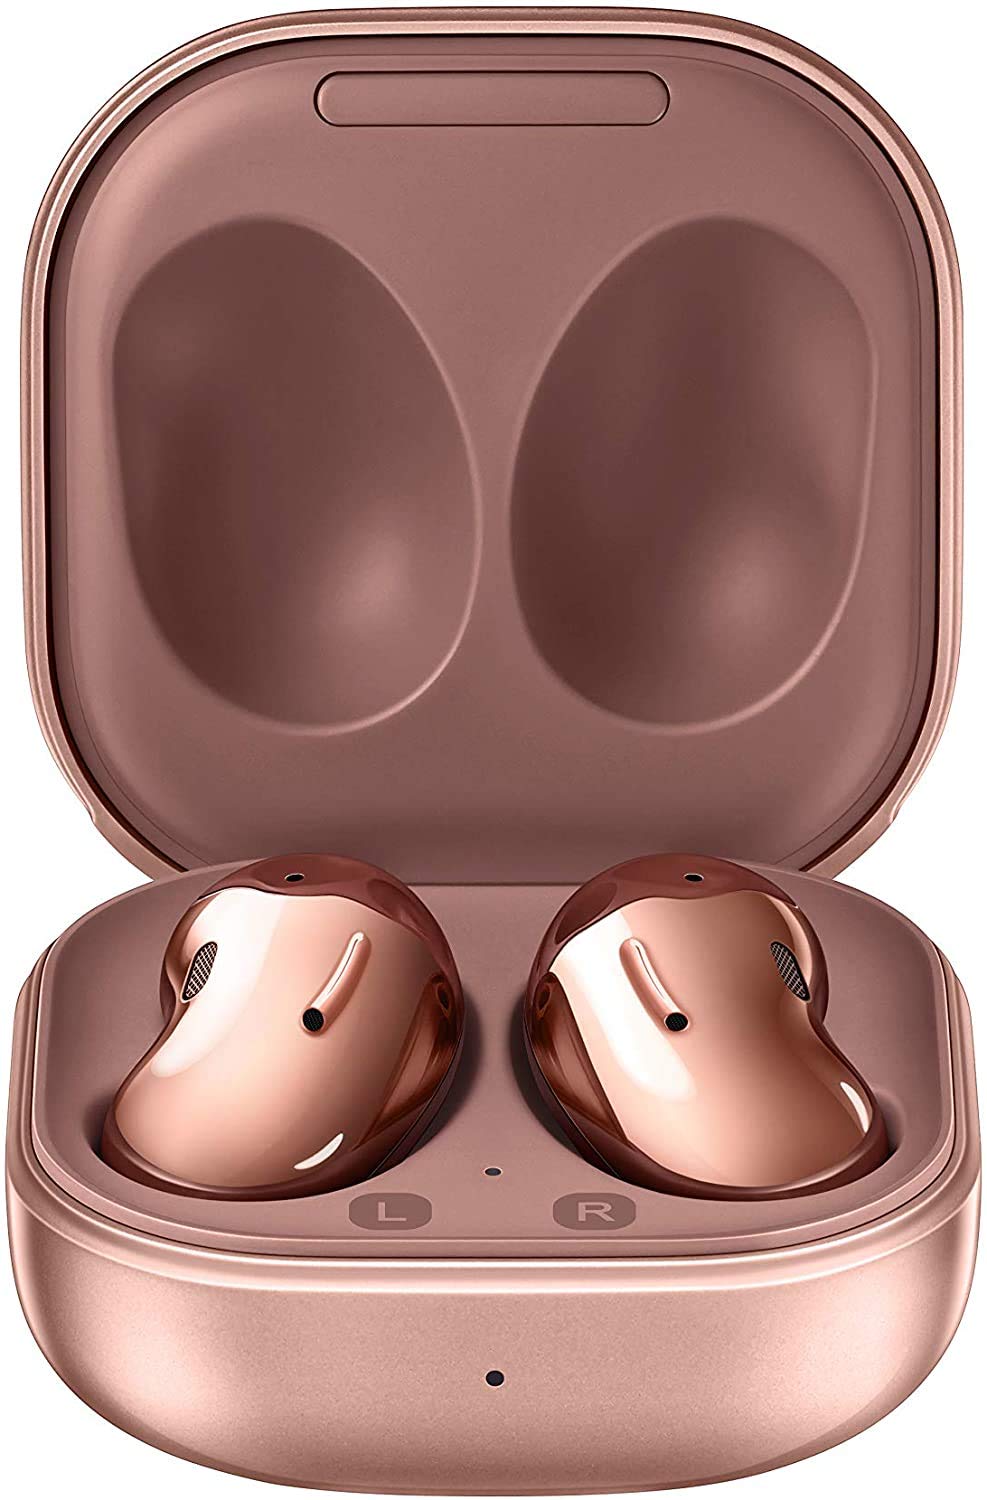 Samsung Galaxy Buds Live, True Wireless Earbuds w/Active Noise Cancelling (Wireless Charging Case Included), Black